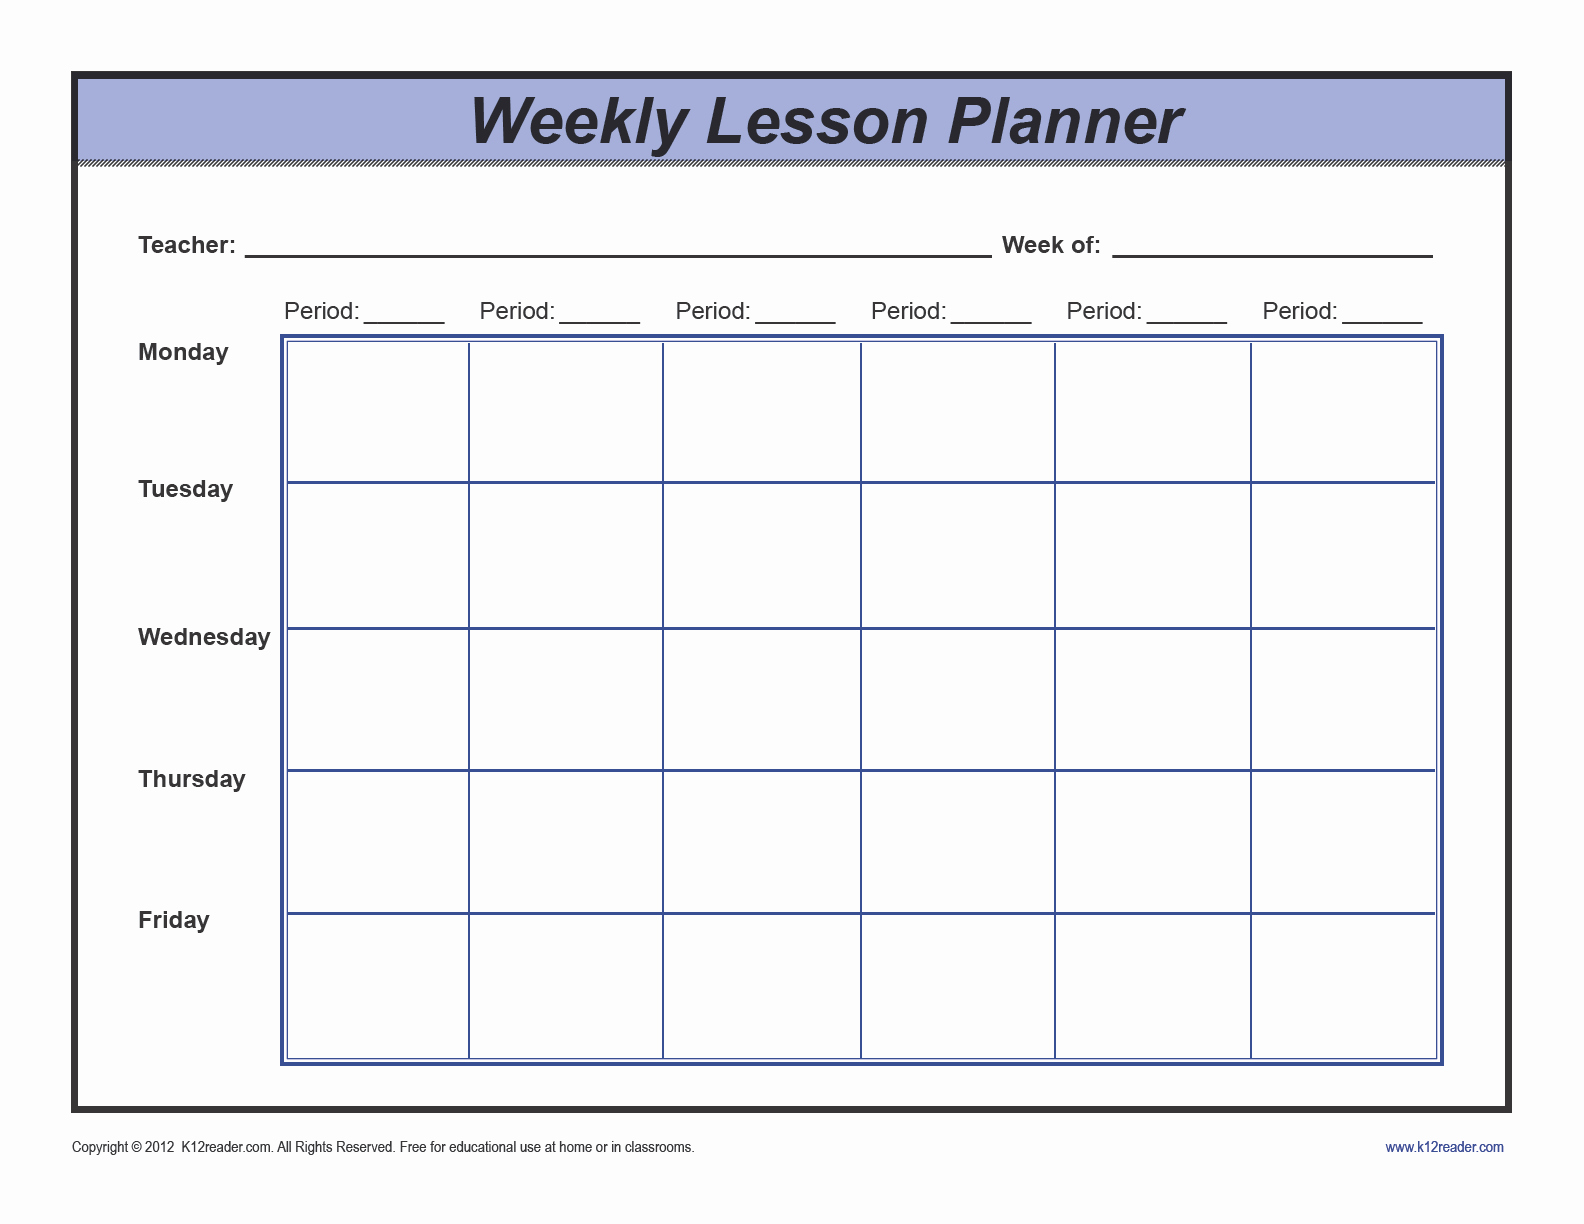 Weekly Lesson Plan Templates Free Awesome Download Weekly Lesson Plan Template Preschool